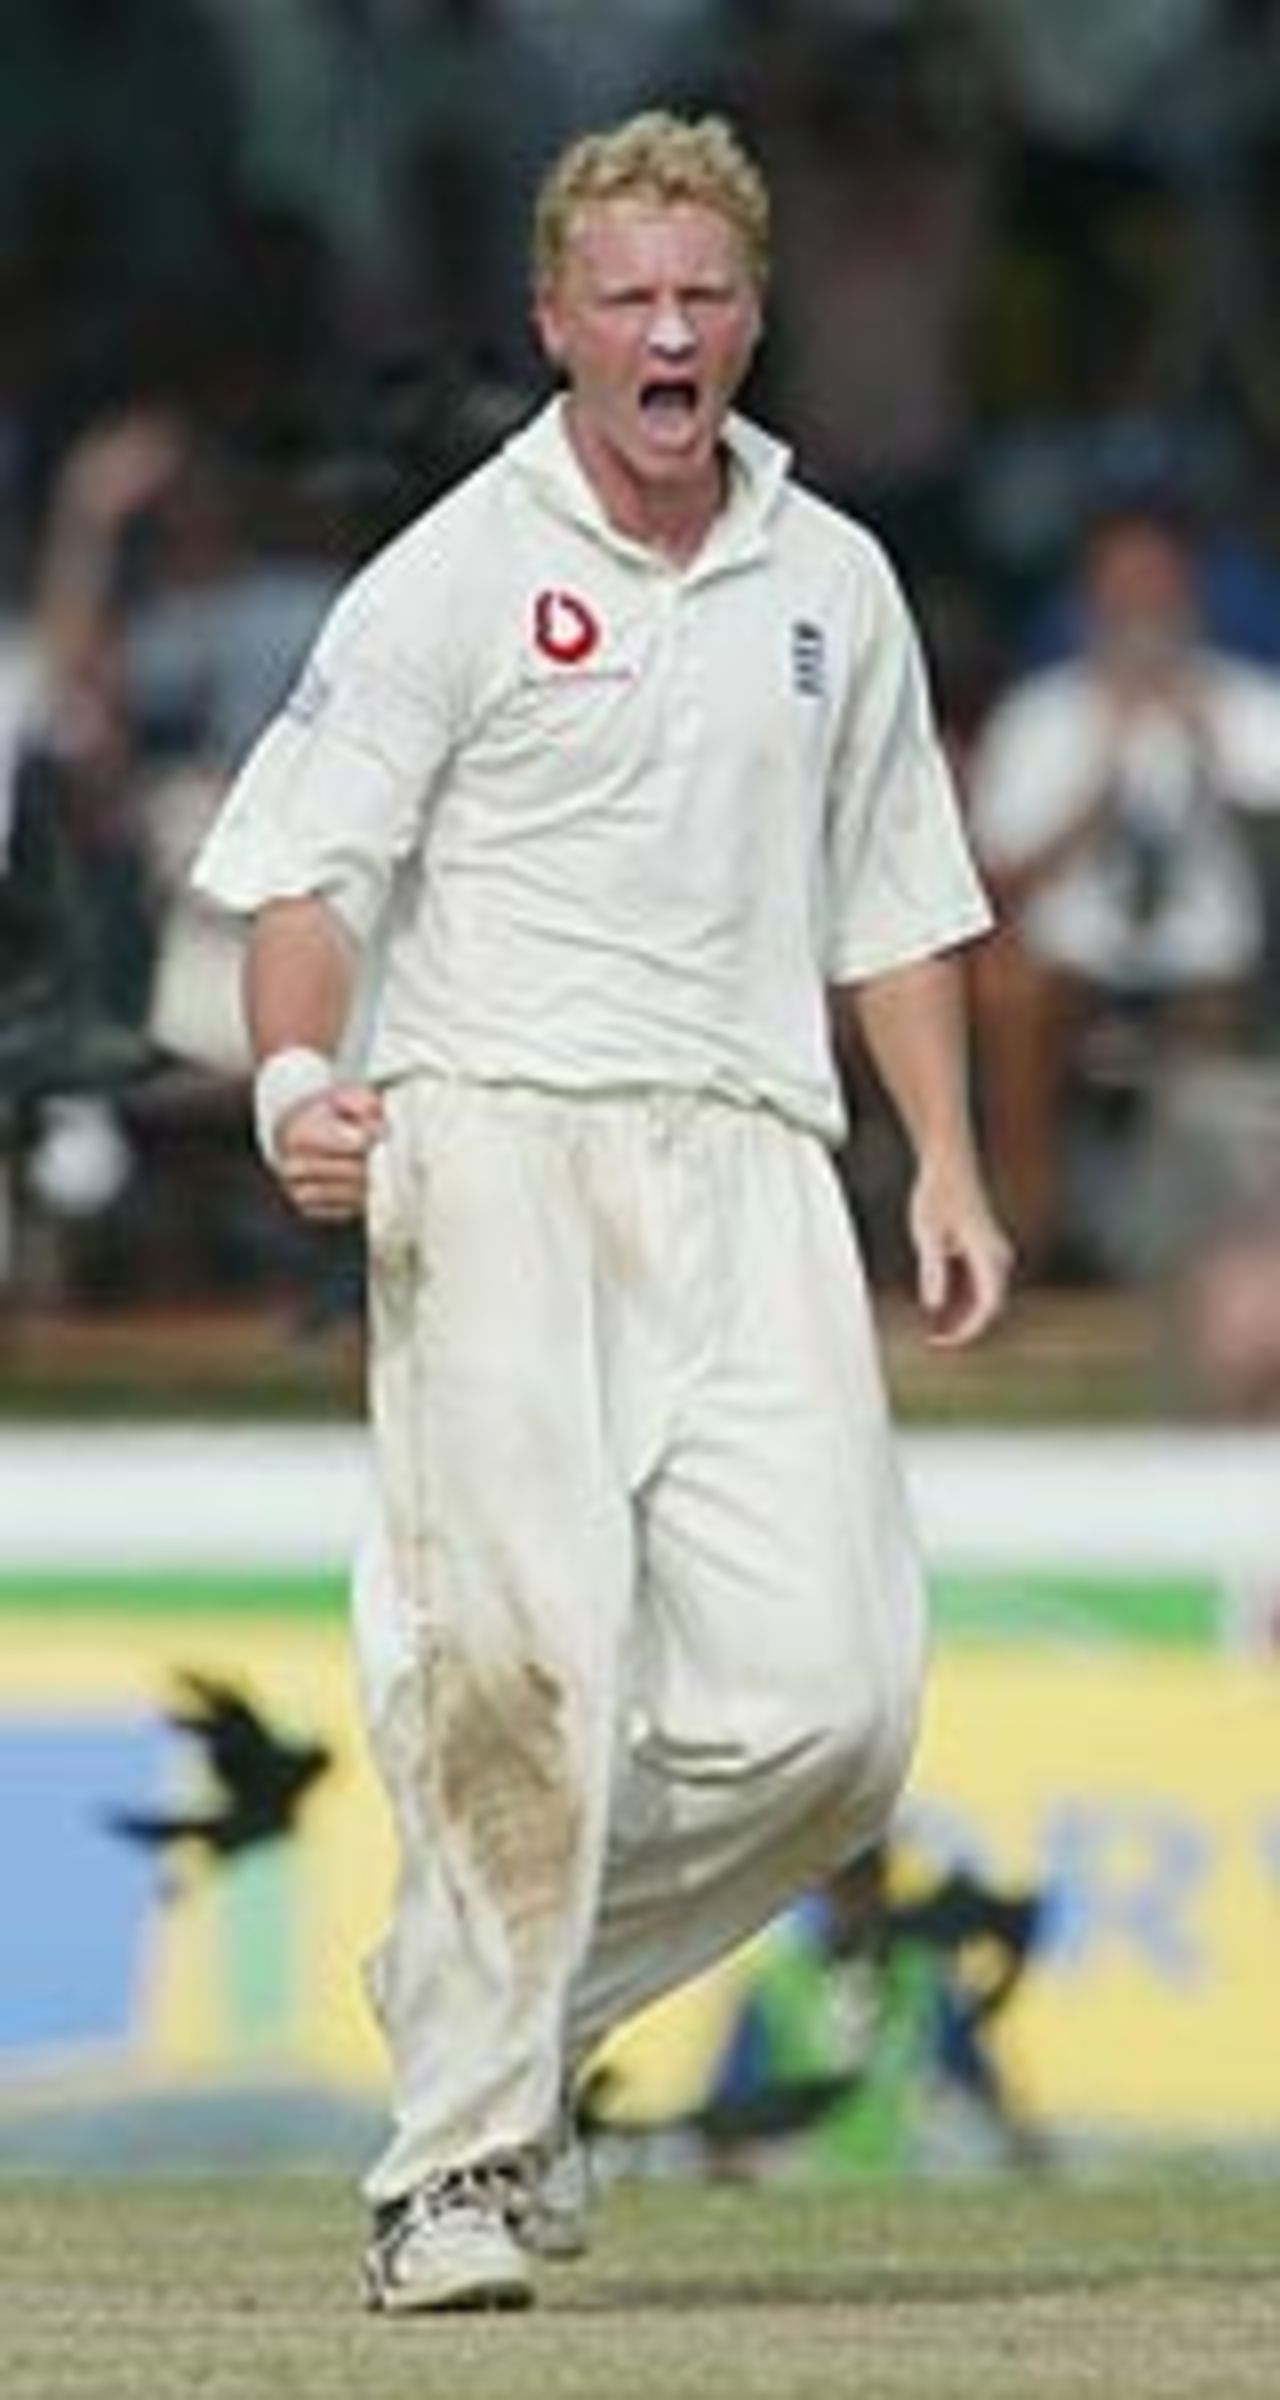 Gareth Batty - five wickets in his second Test